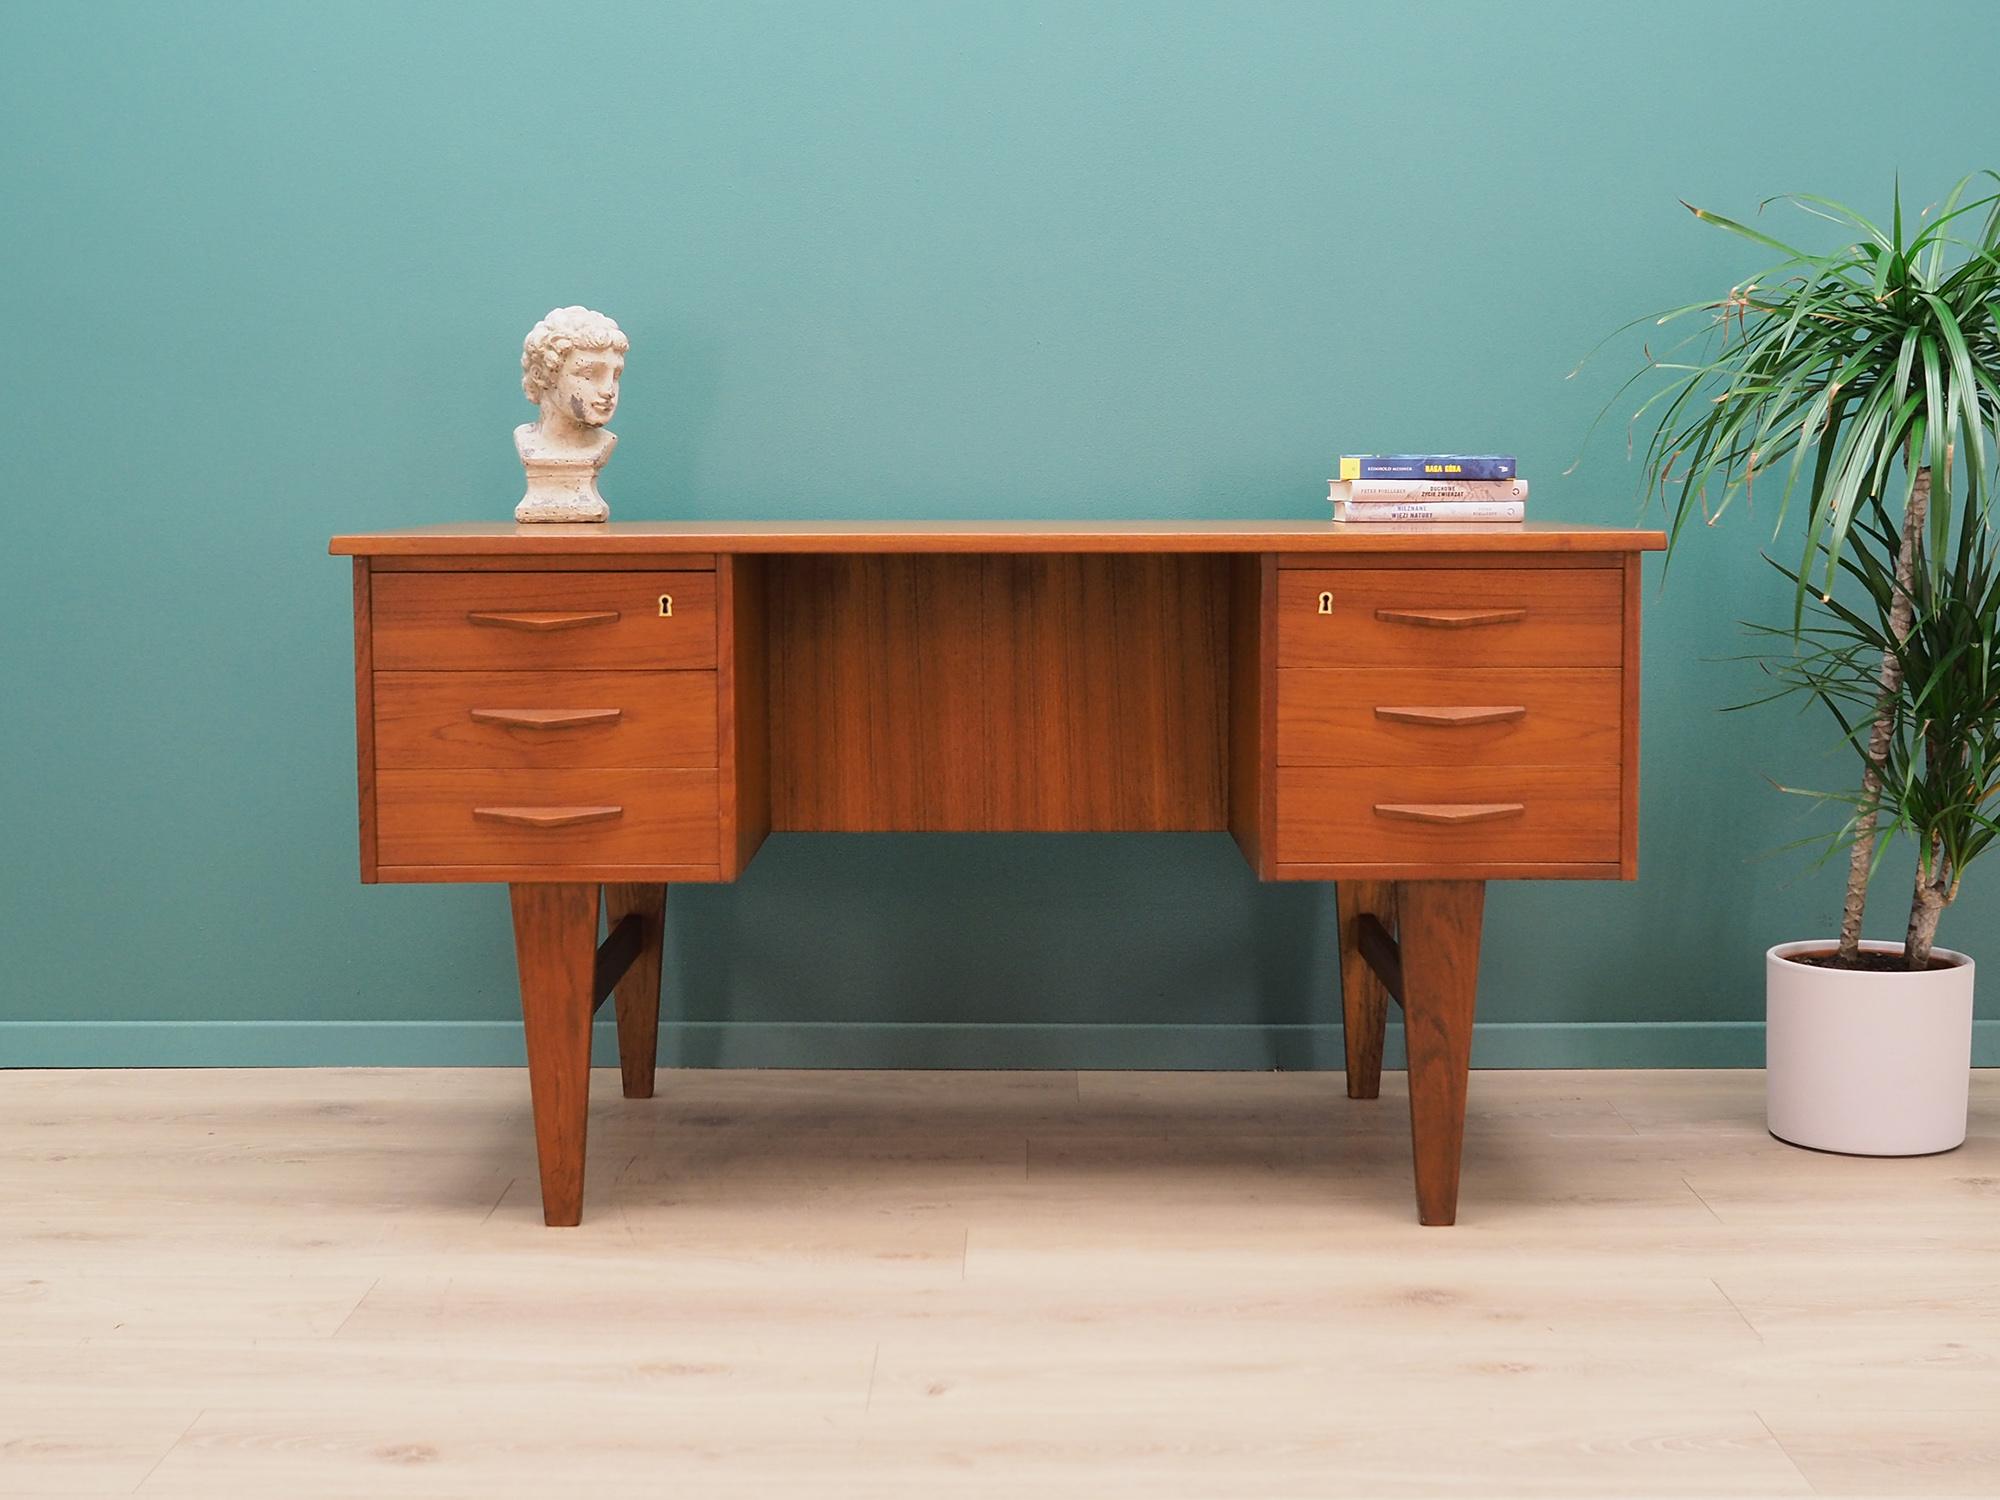 Desk made in the 1960s, Danish production.

The structure and top are covered with teak veneer. The legs are made of solid teak wood, perfectly integrated into the structure of the desk. The surface after refreshing. The front of the desk has six